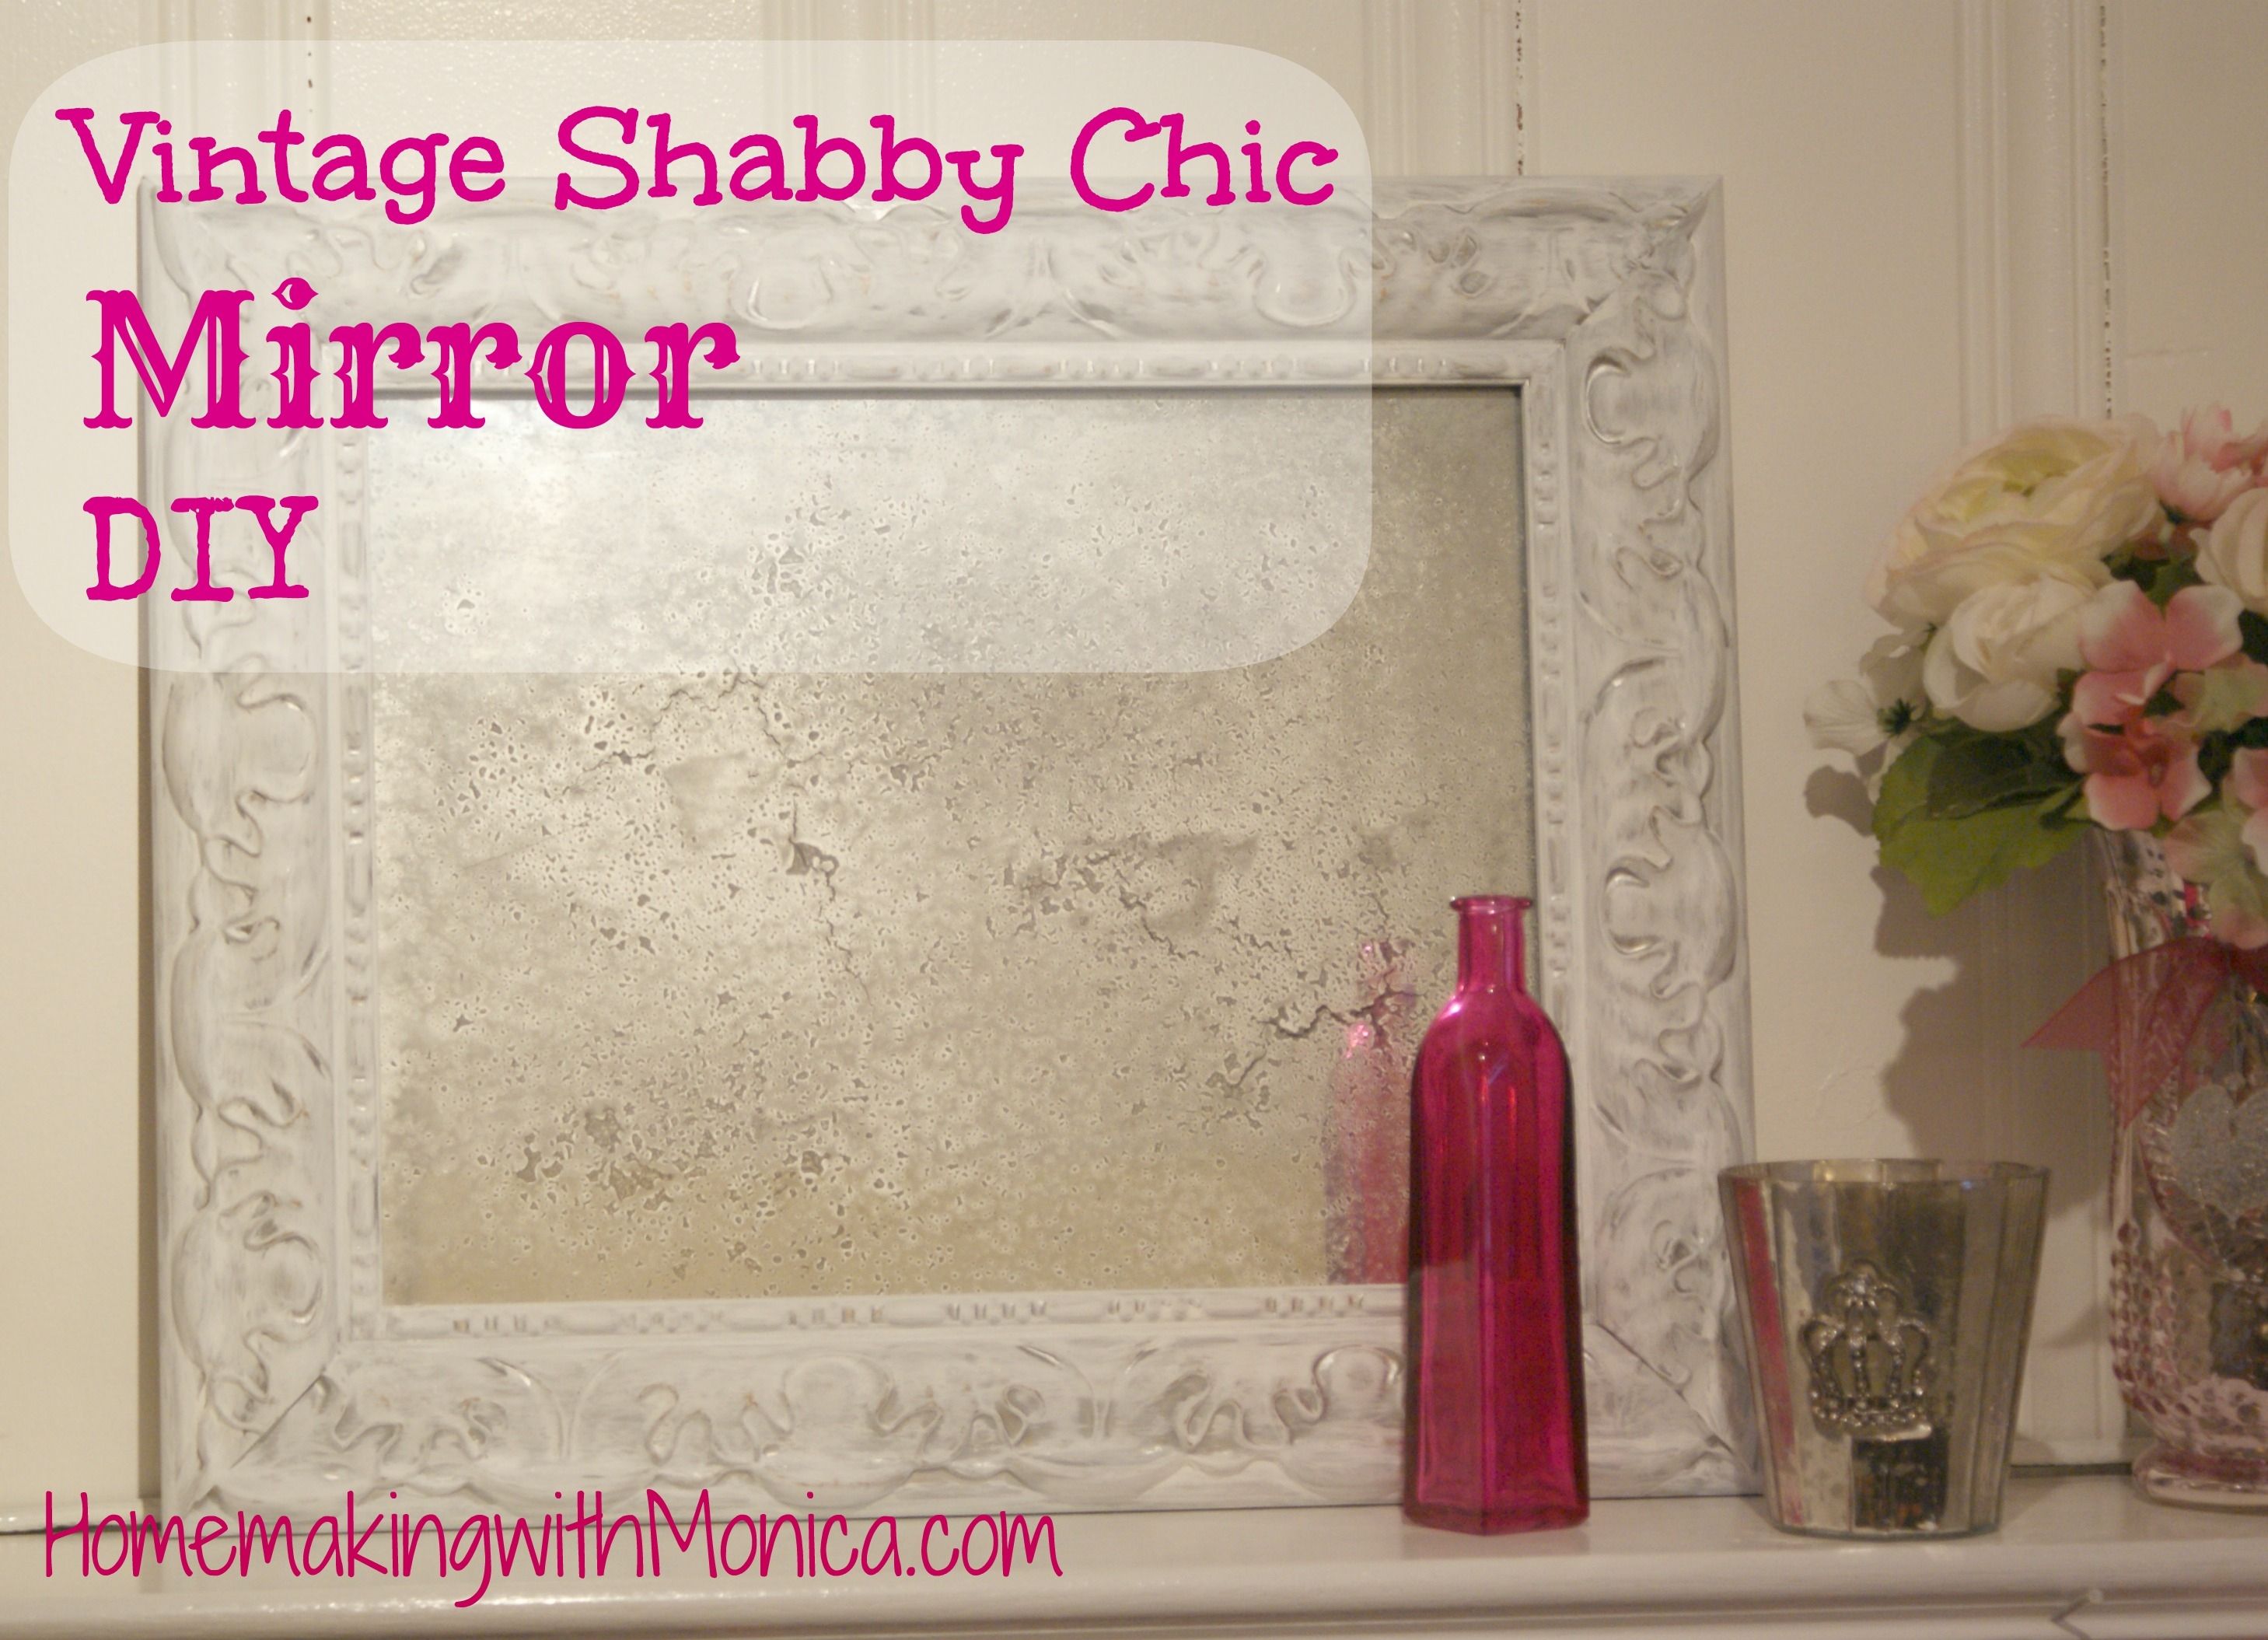 Vintage Shab Chic Mirror Diy Homemaking With Monica Throughout Vintage Shabby Chic Mirrors (View 3 of 15)